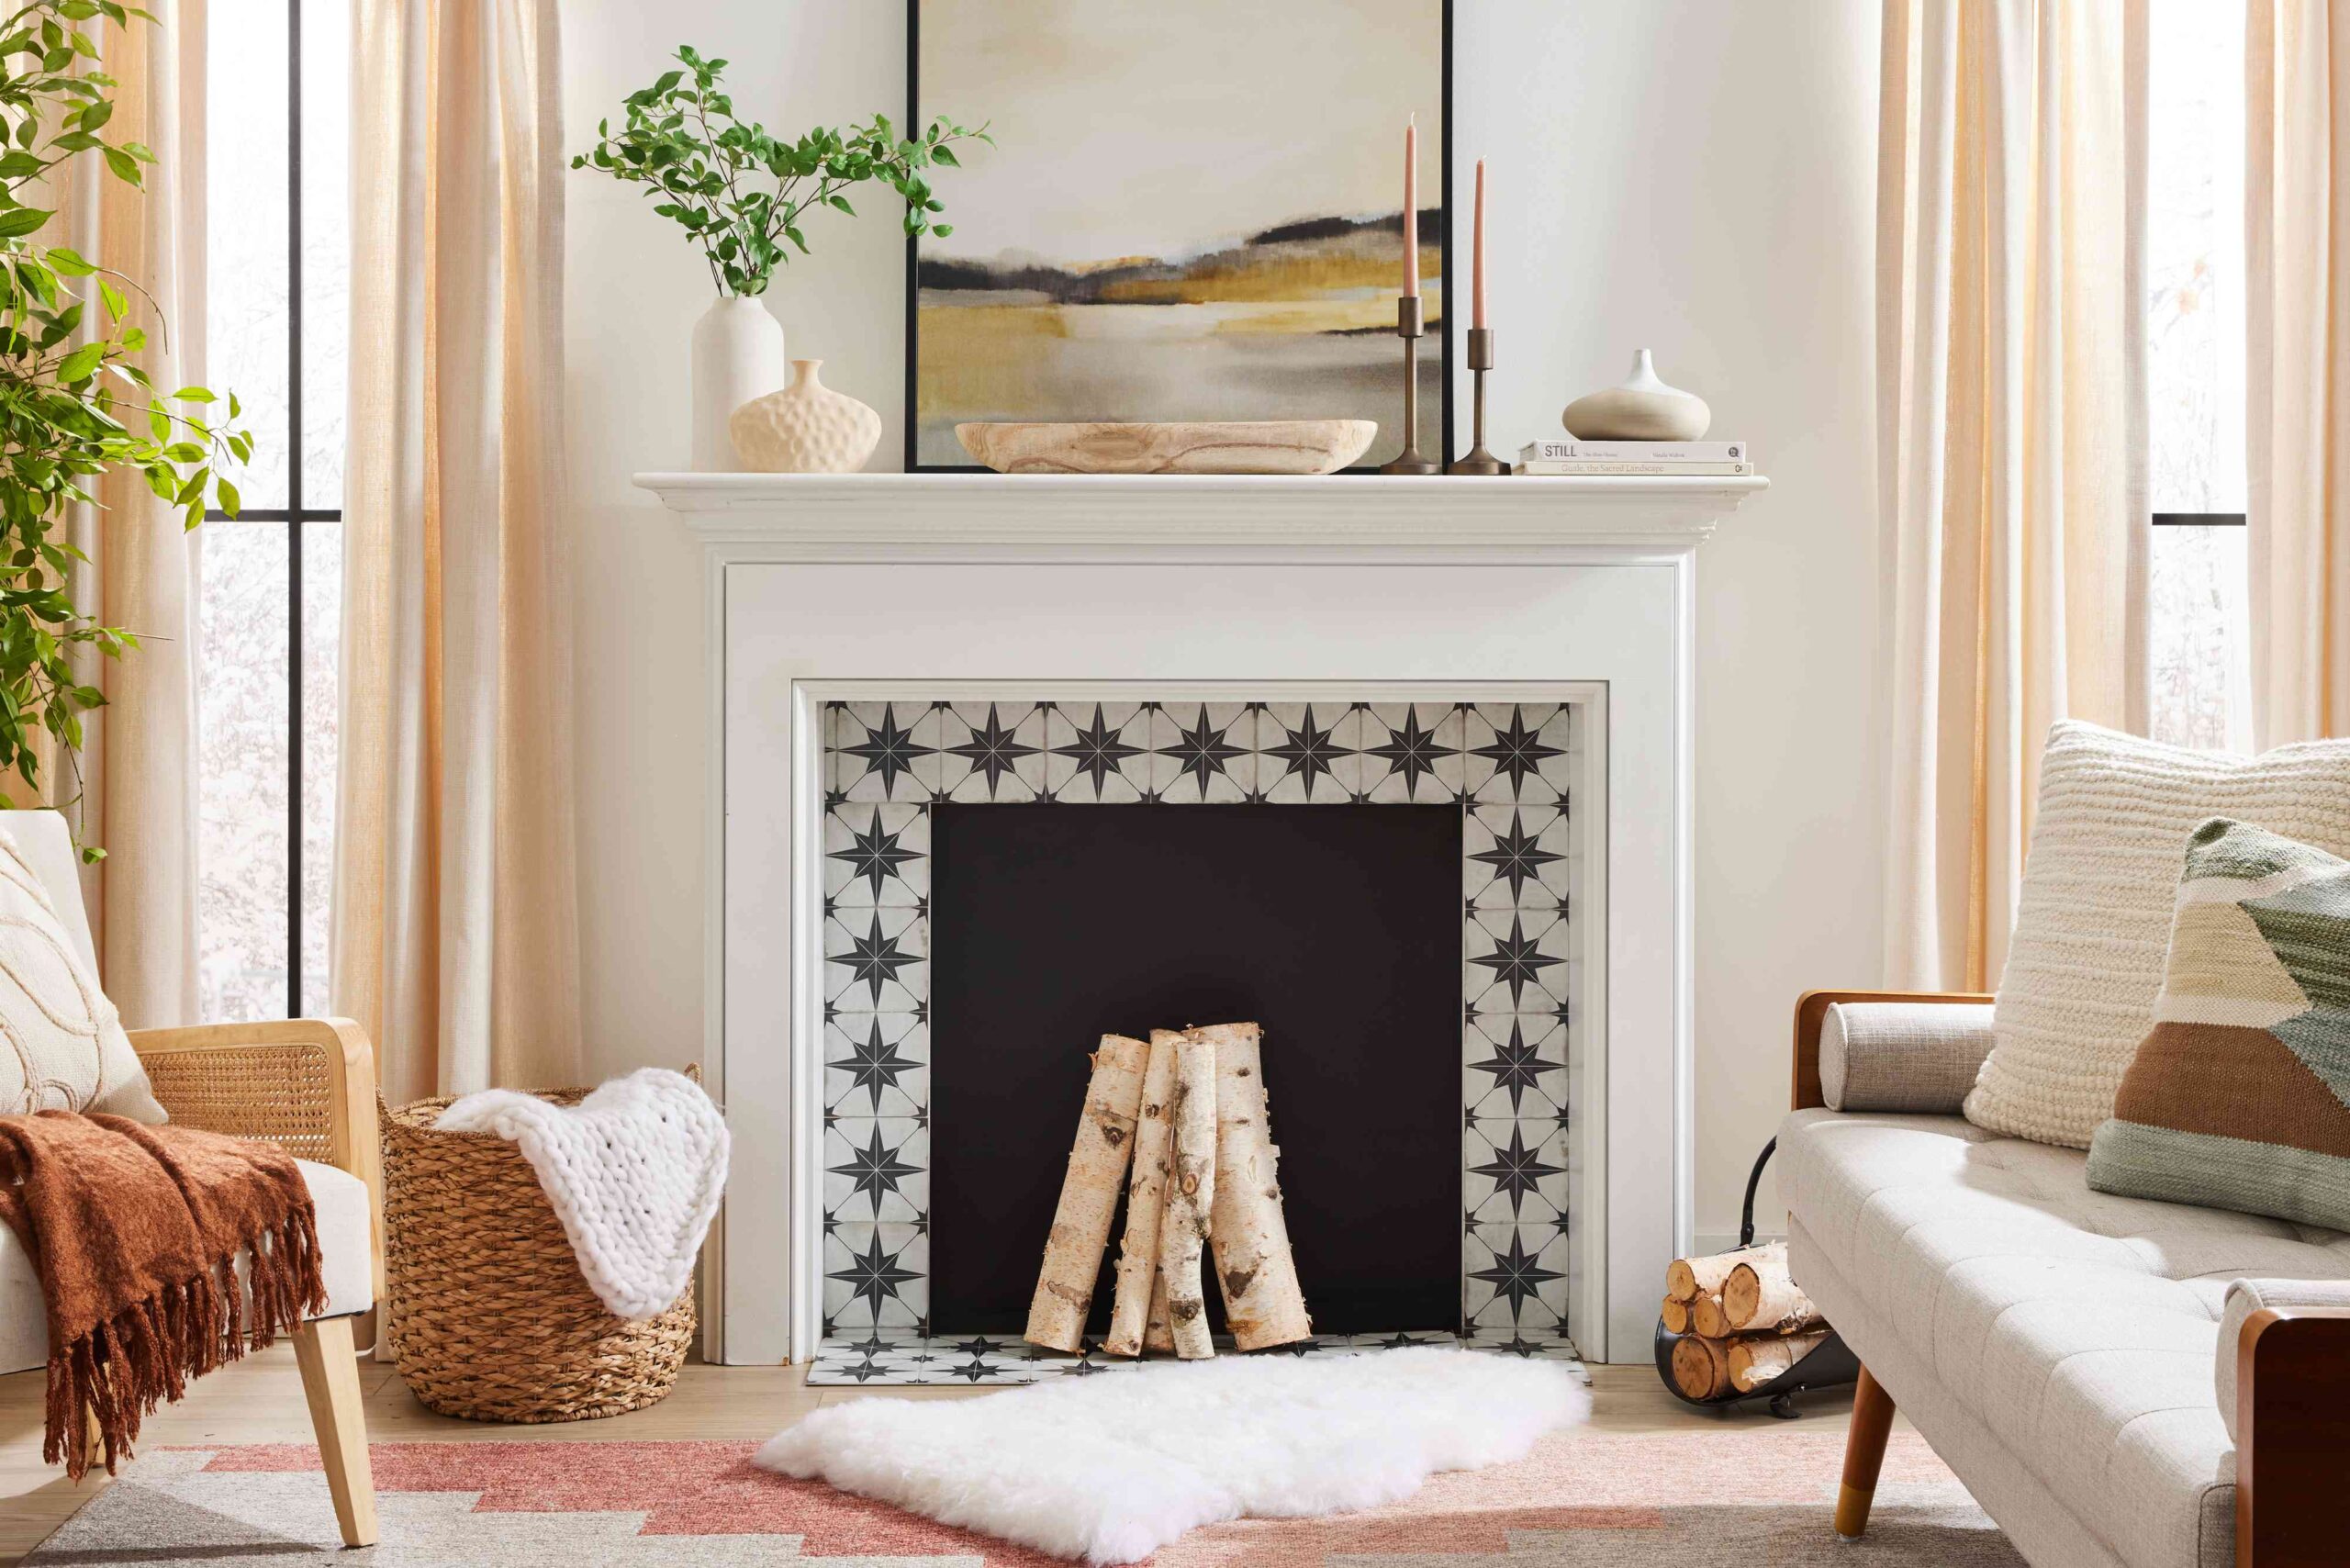 A Touch of Tradition: Adding a Wooden Mantel to Your Fireplace